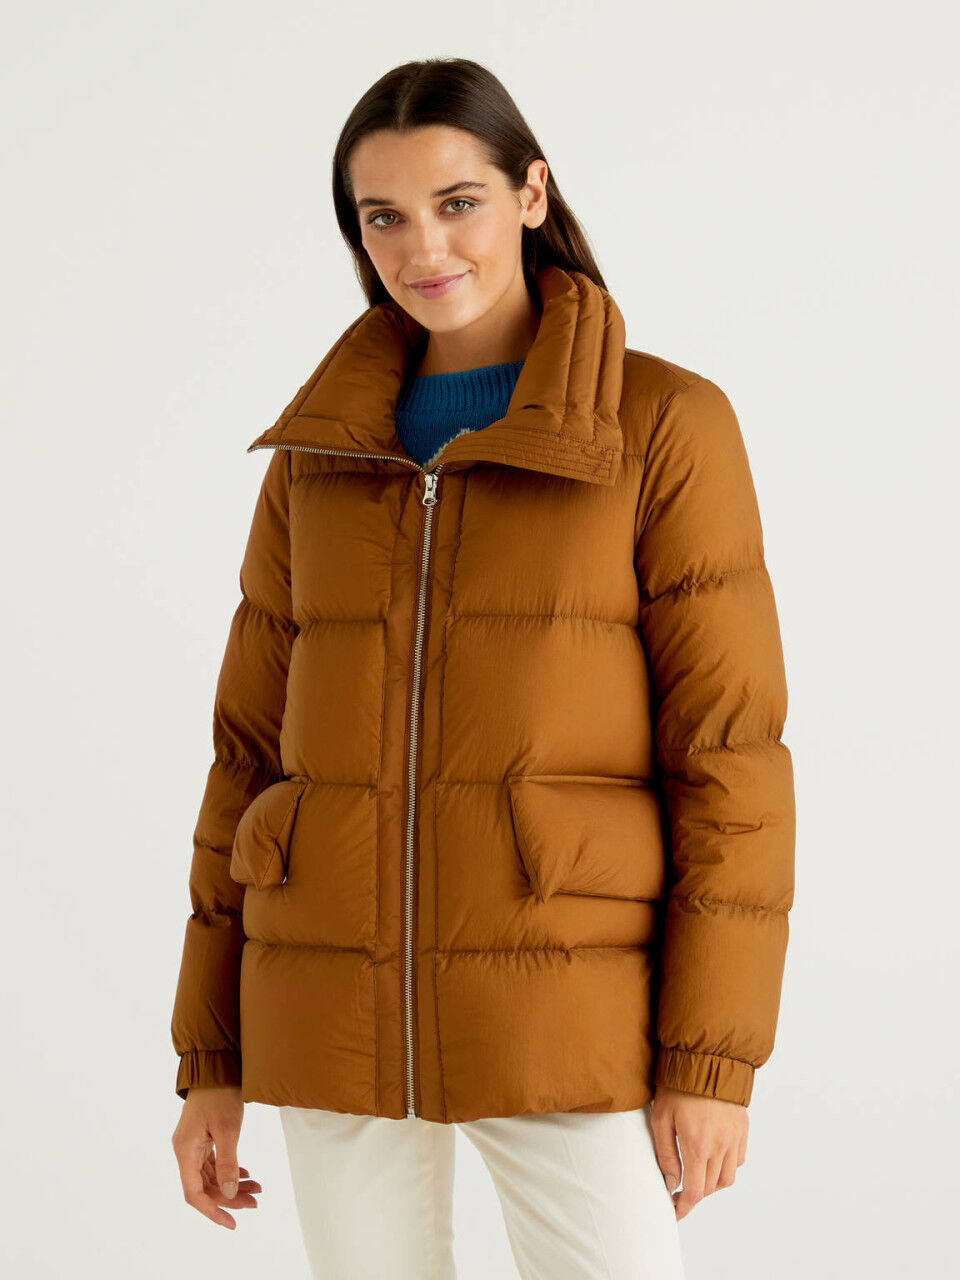 Women's Puffer Jackets New Collection 